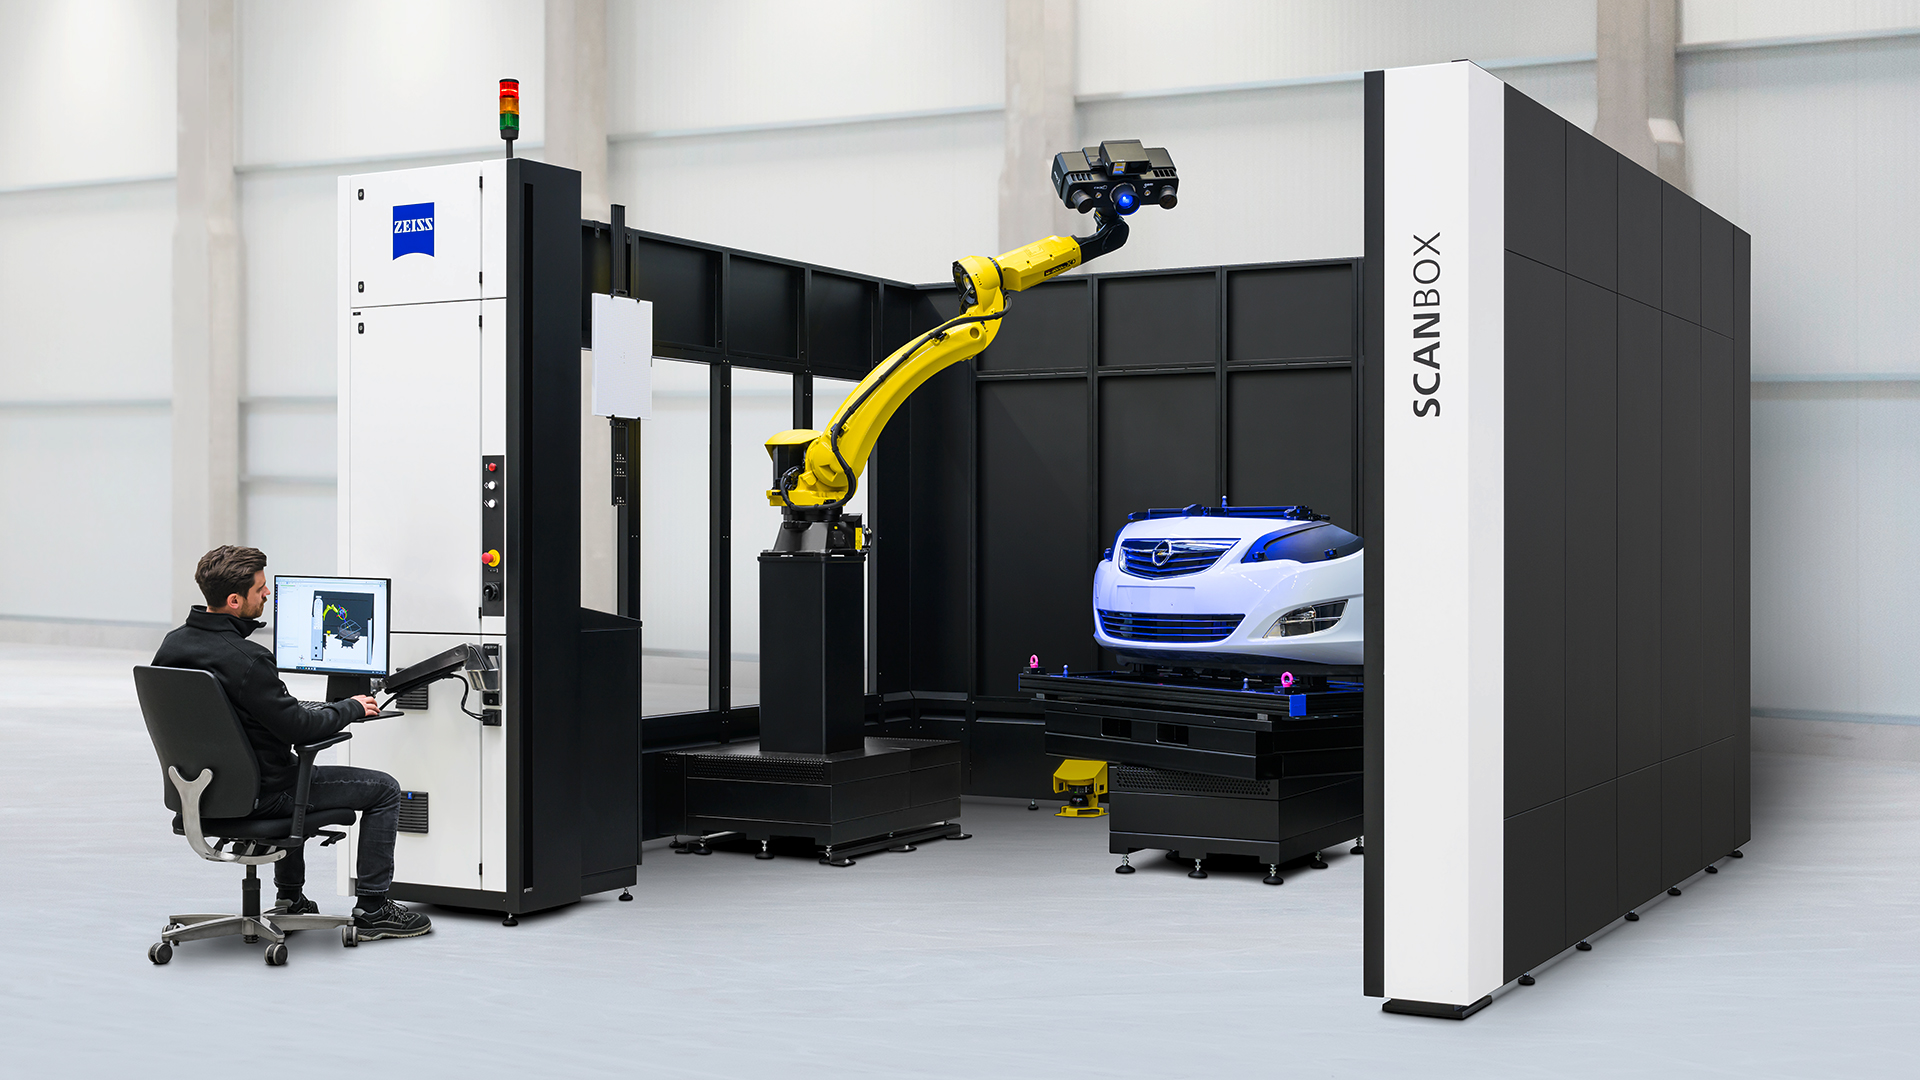 ZEISS ScanBox - Commercial Off The Shelf (COTS) Automated Precision Inspection Solution for Rapid Deployment